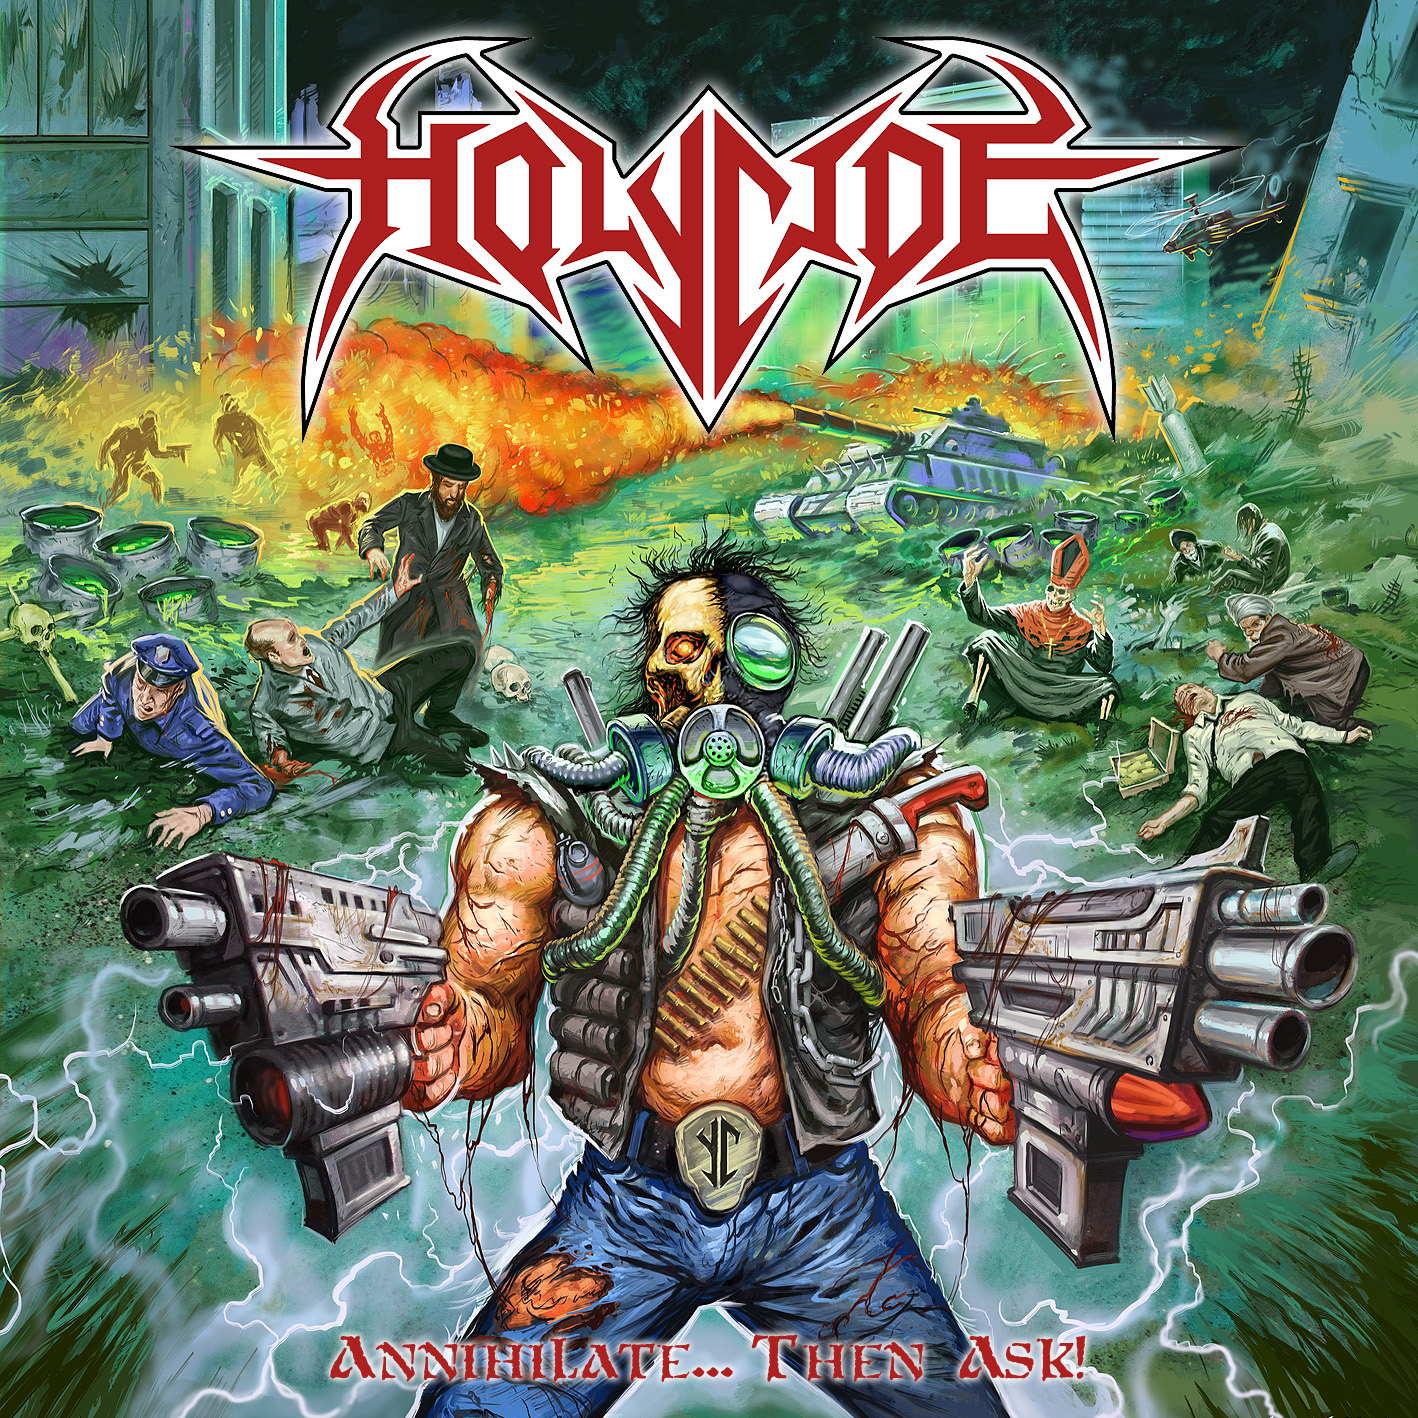 Holycide - “Annihilate.. Then Ask!”